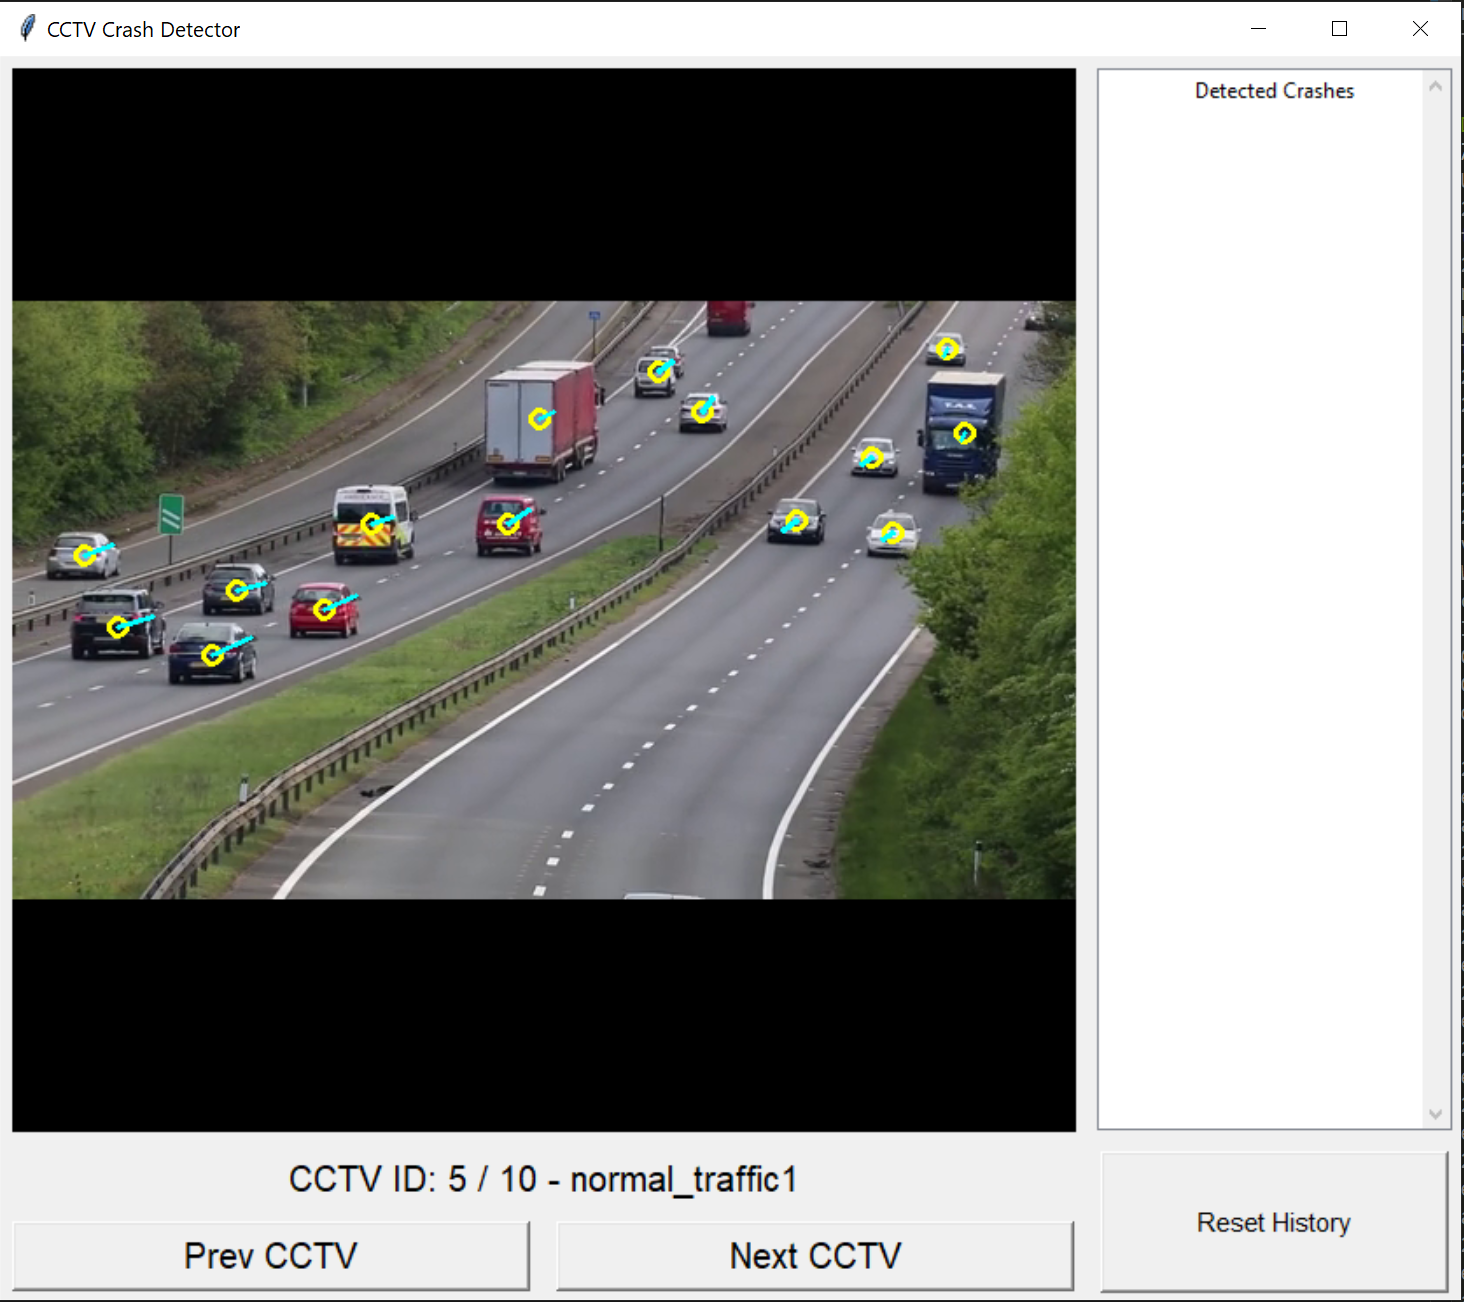 Serverside UI showing detection of vehicles from real-world CCTV footage.